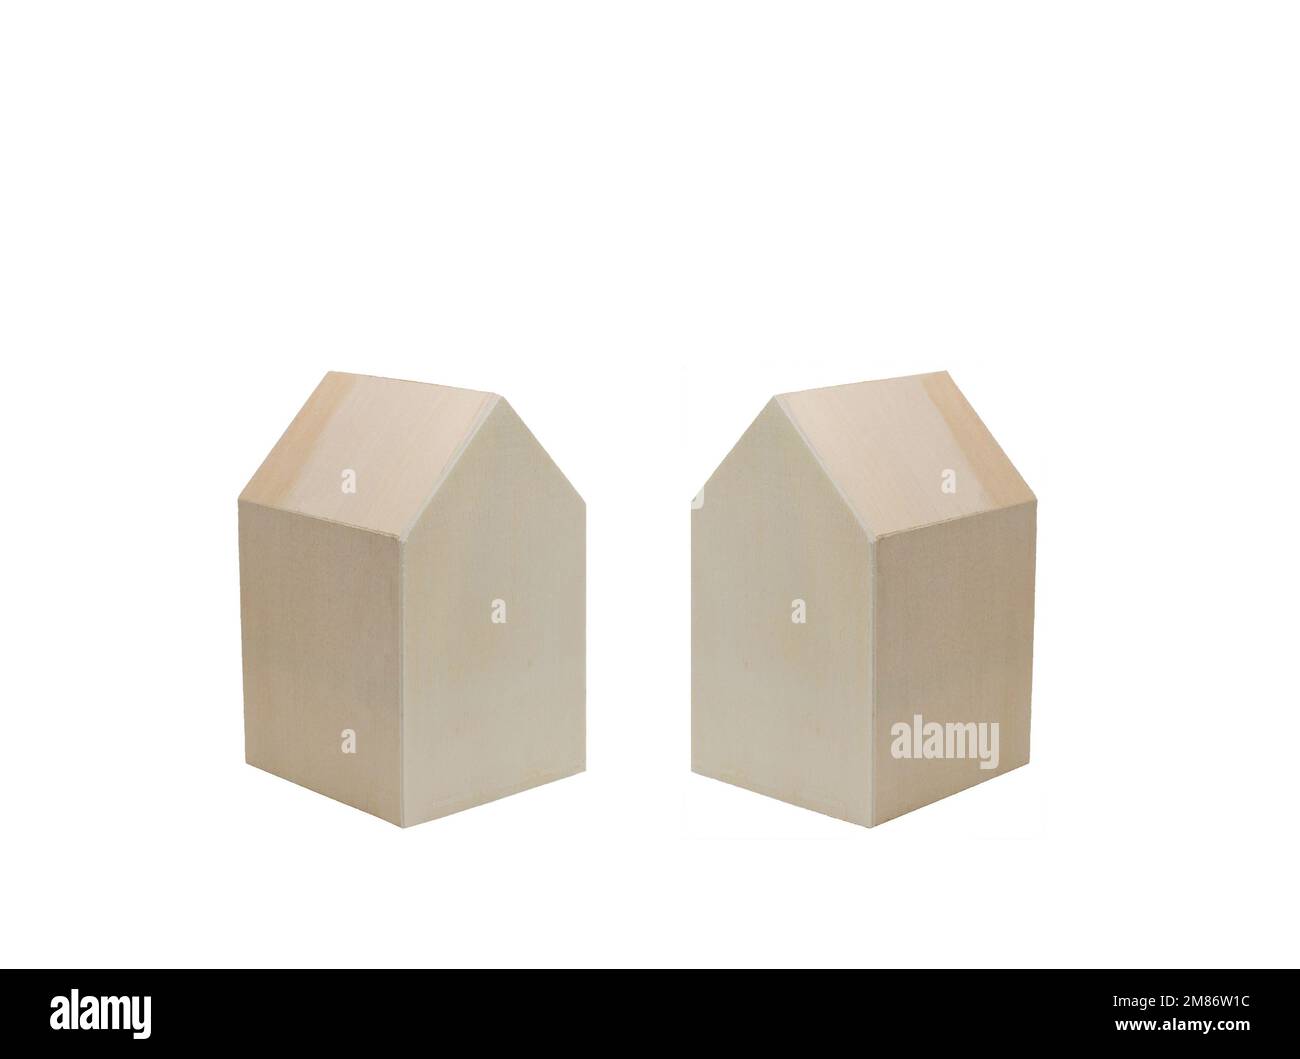 Pair of wooden house shapes on a plain white background. Housing concept. Copy space. No people. Stock Photo